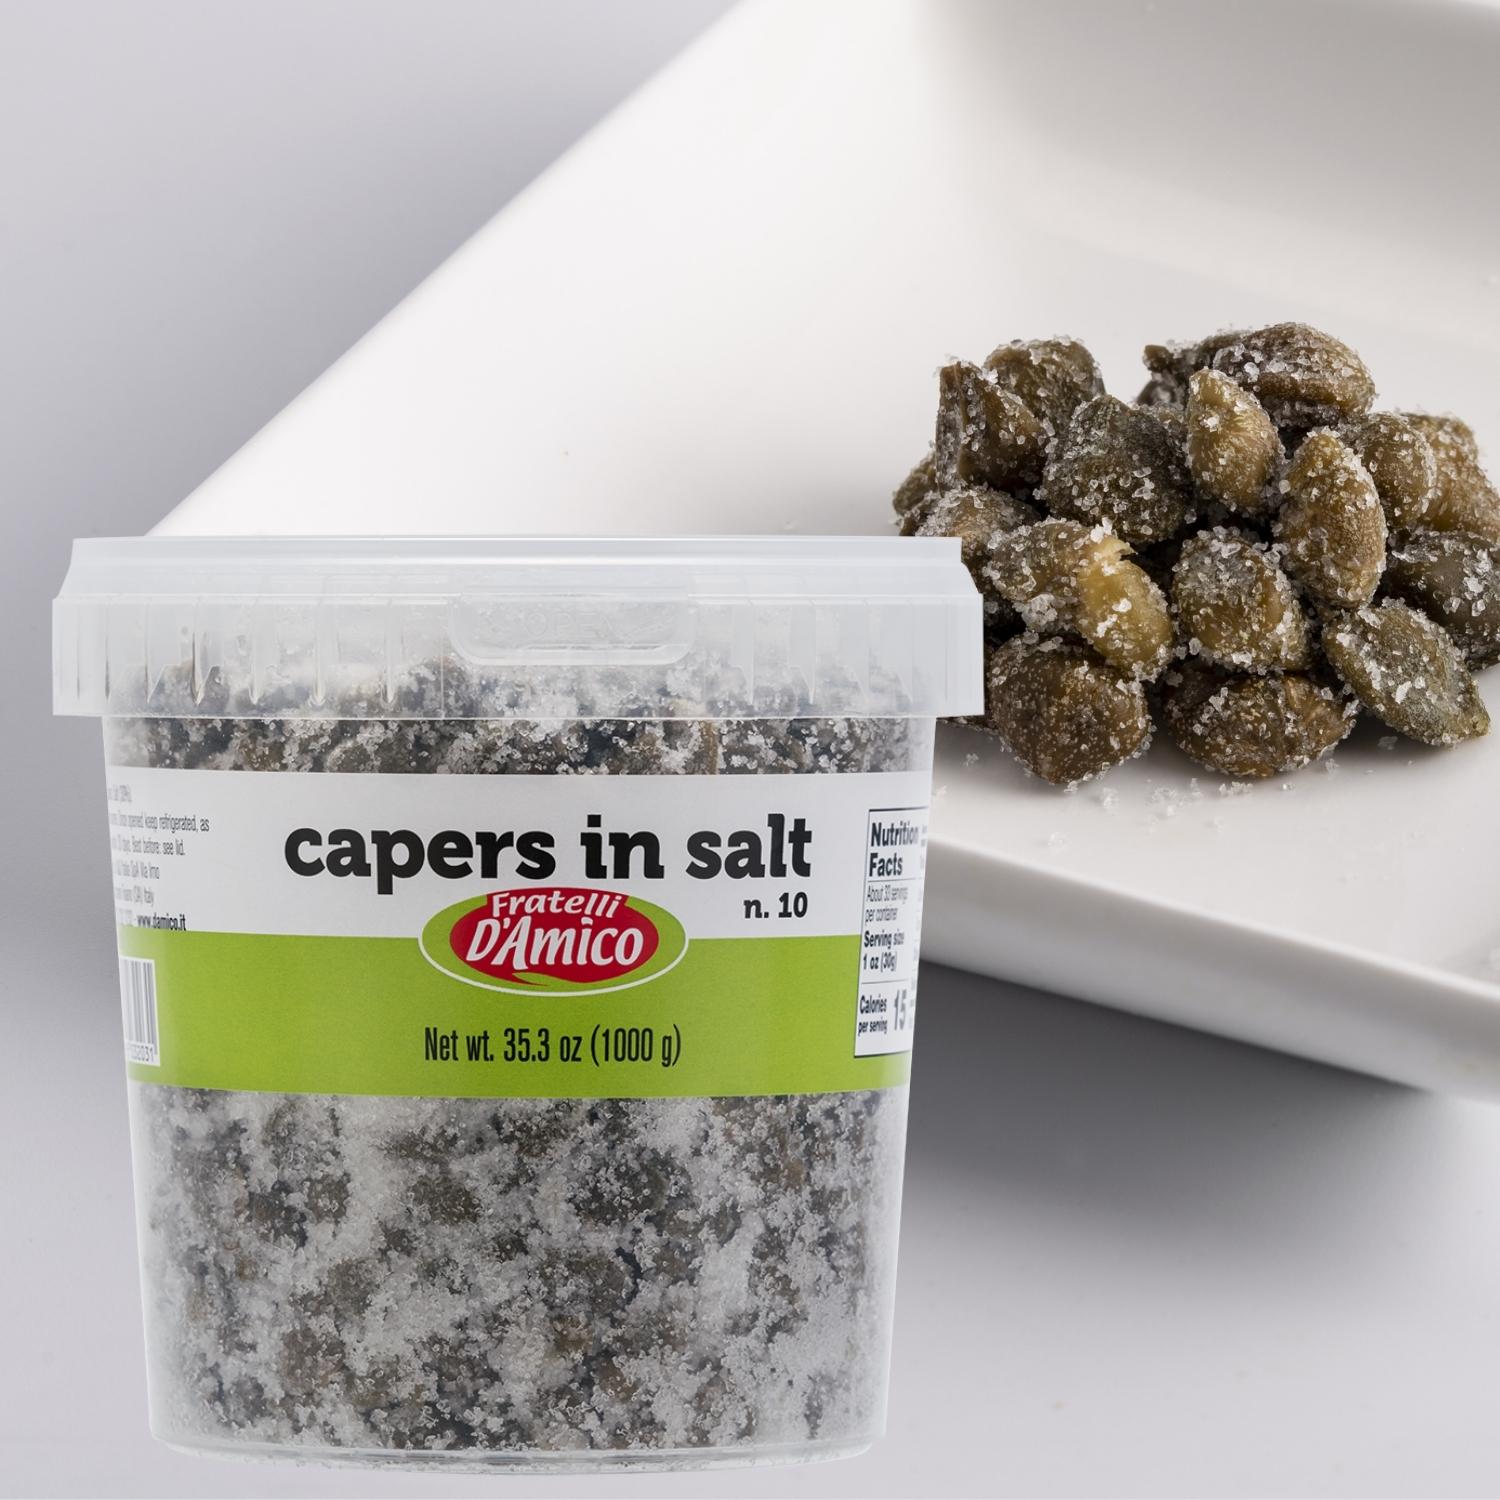 Fratelli D'Amico Capers in Salt n.10 Family Size, Net wt. 35.3oz (1000g)